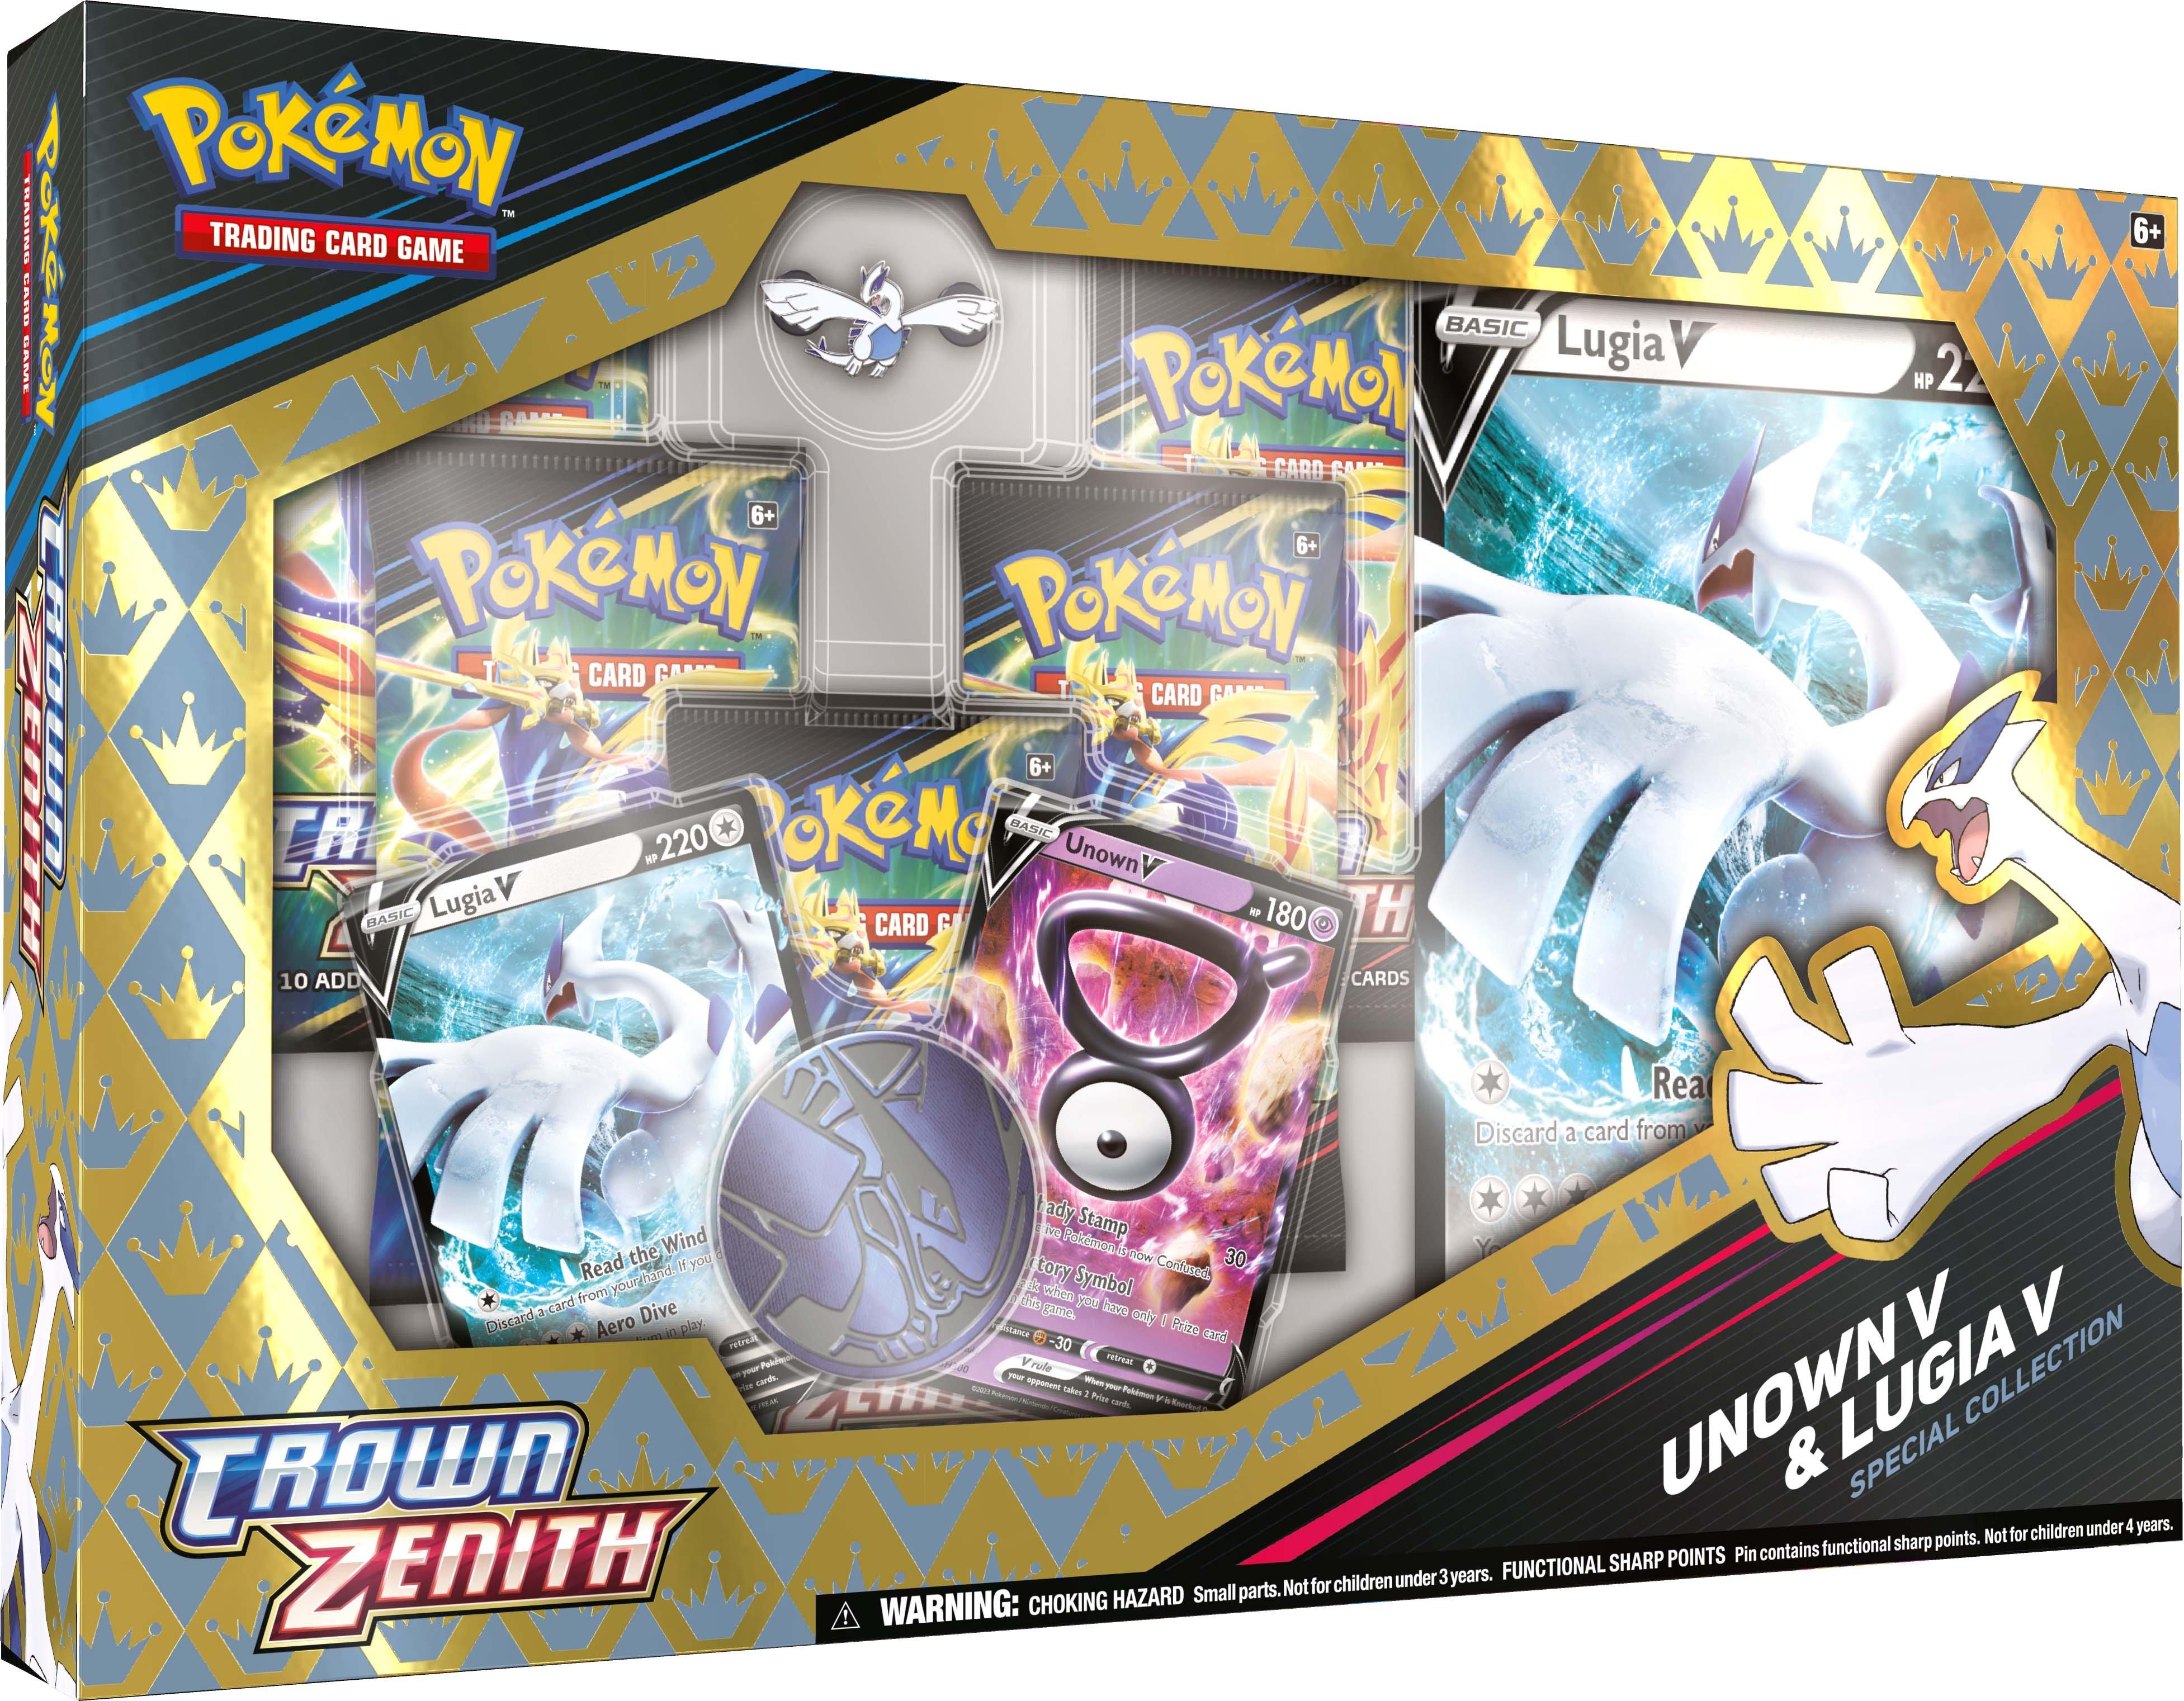 GameStop - Pokémon Trading Card Game: Crown Zenith Unown V and